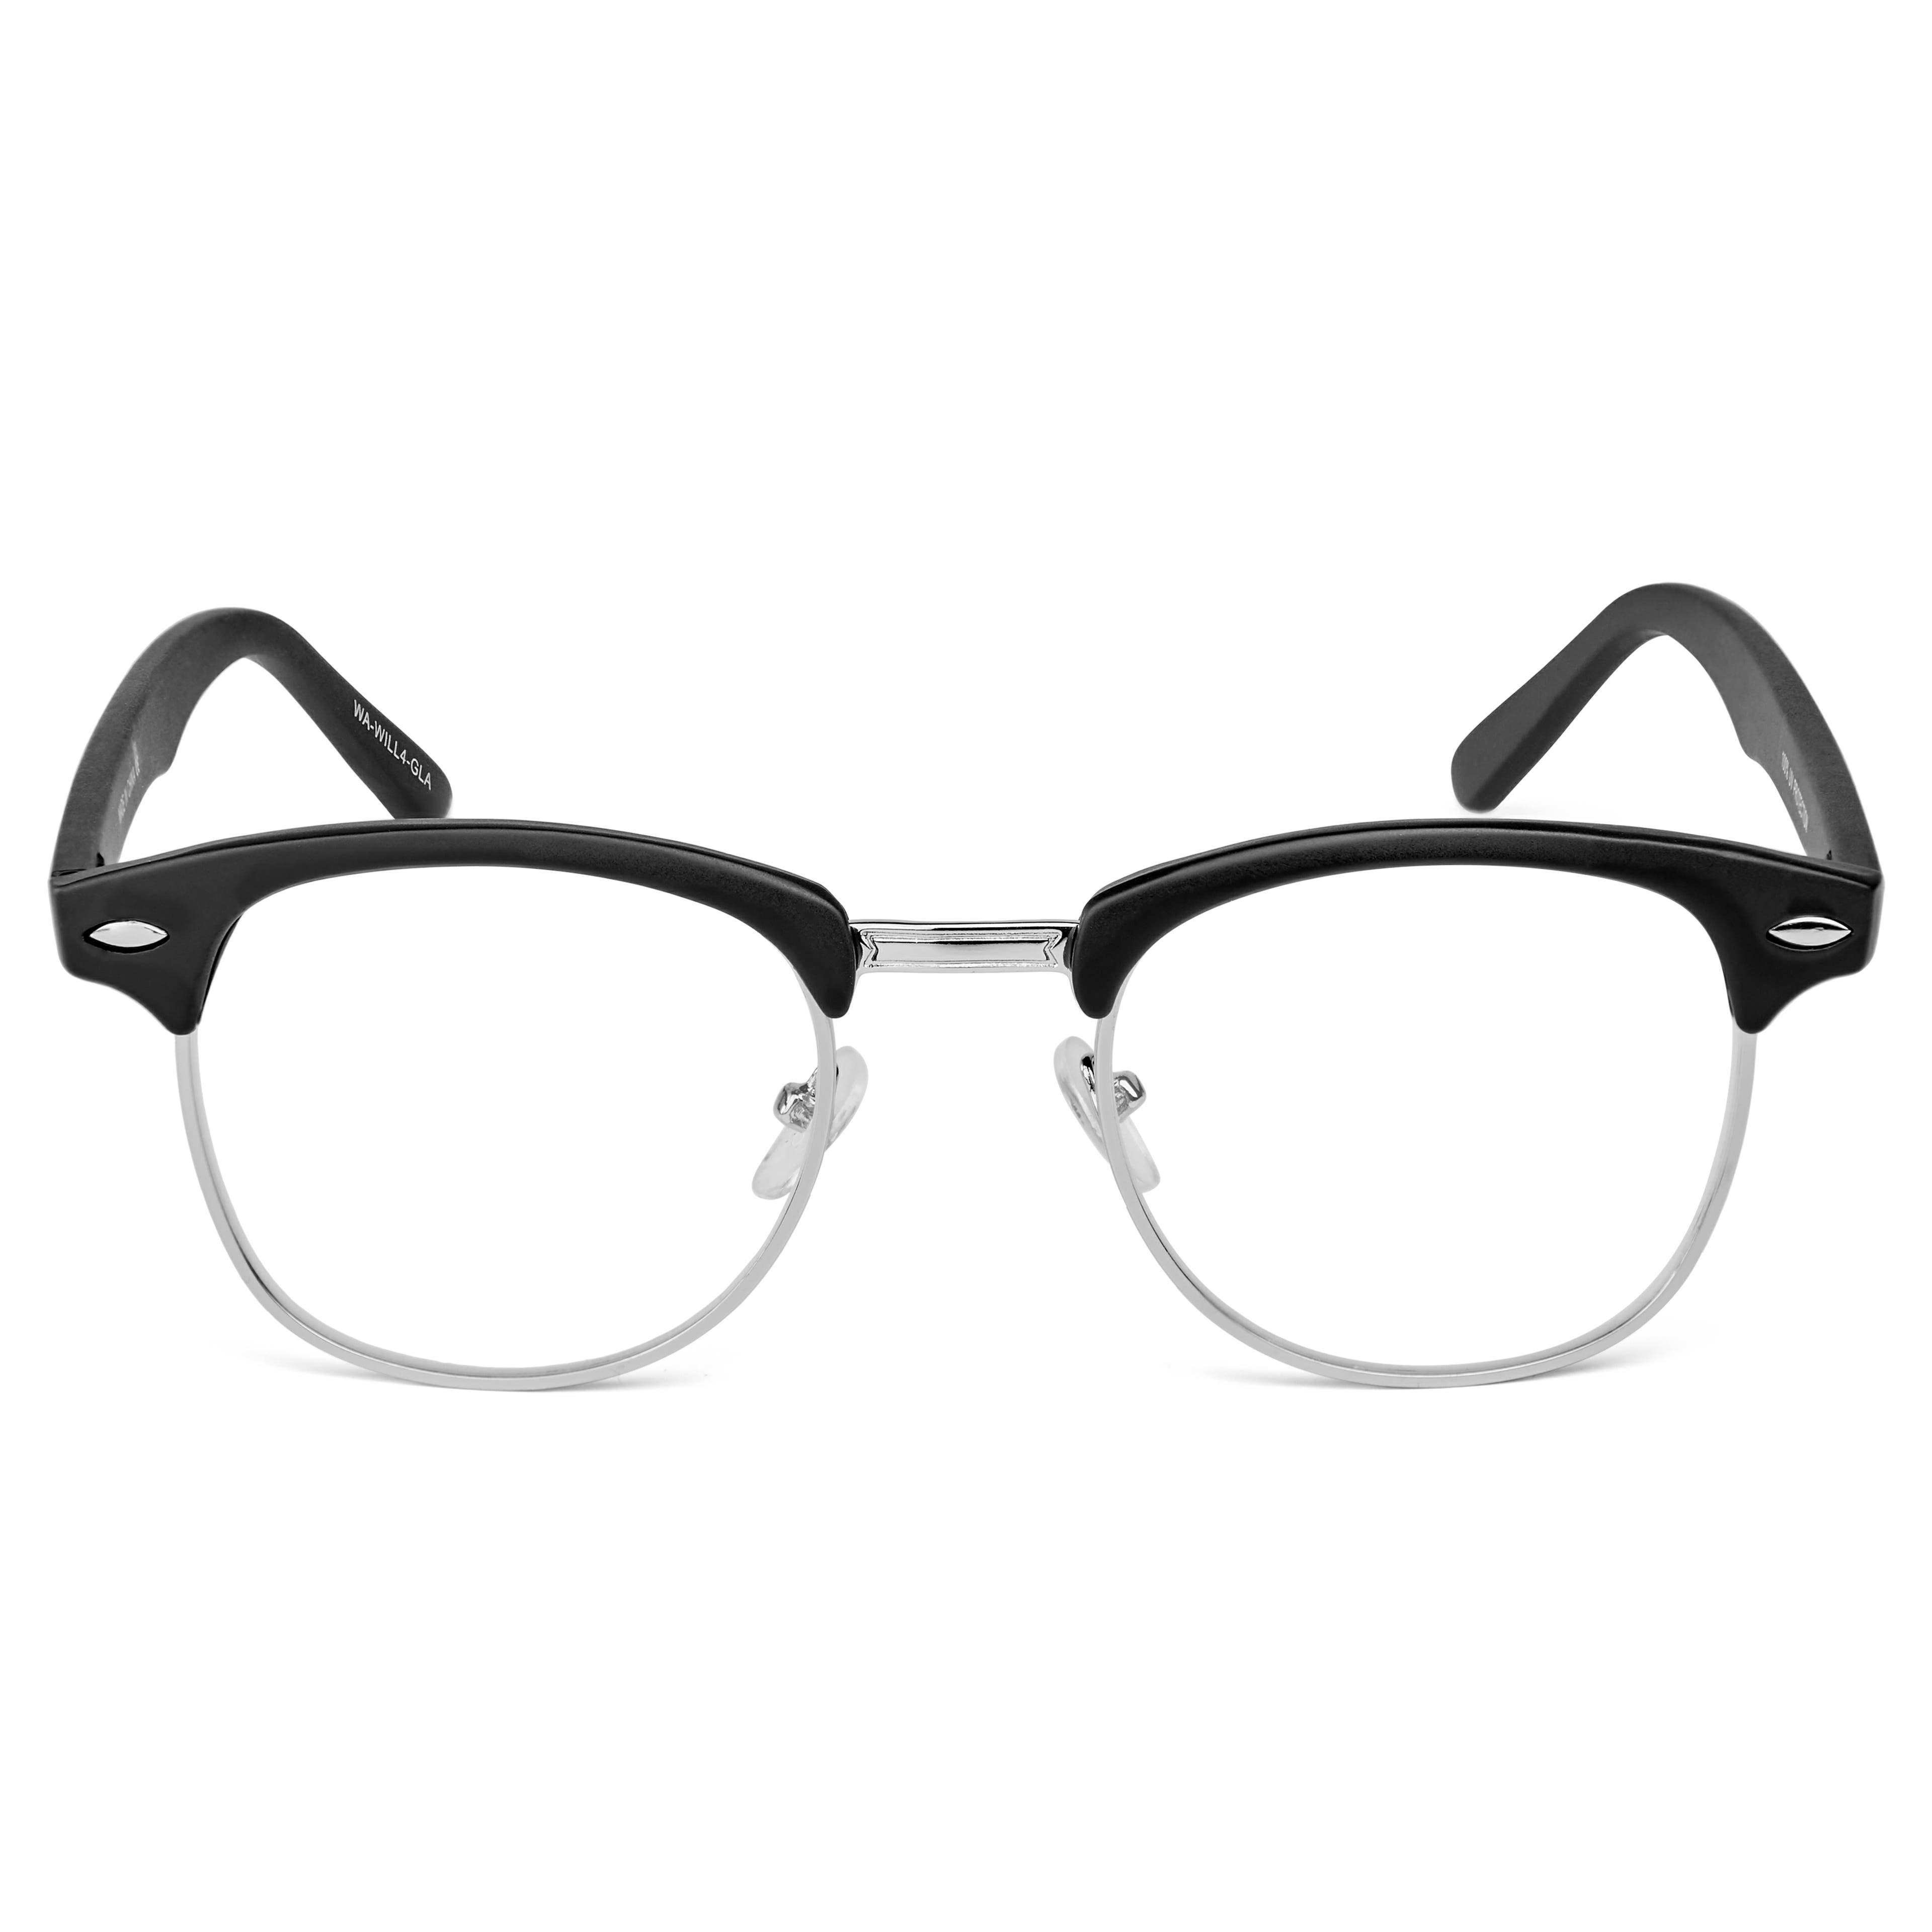 Stylish Fake Glasses for Men - Best of Men's Fashion & Jewelry Items